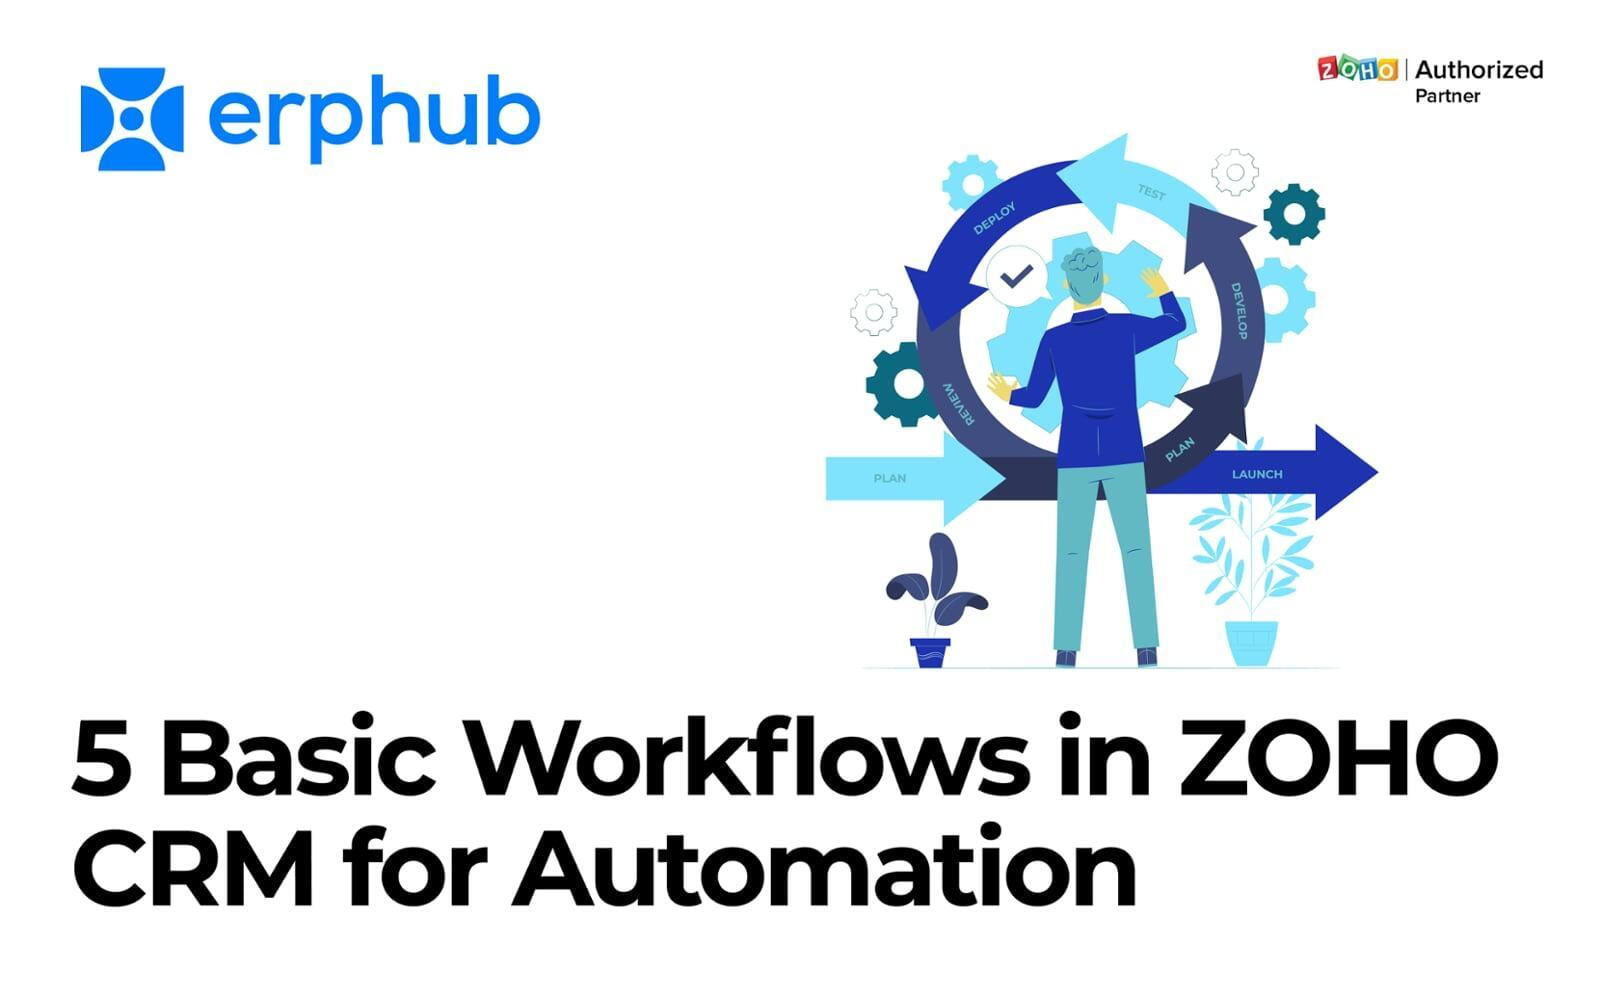 5 Basic Workflows in ZOHO CRM to Automate your Business